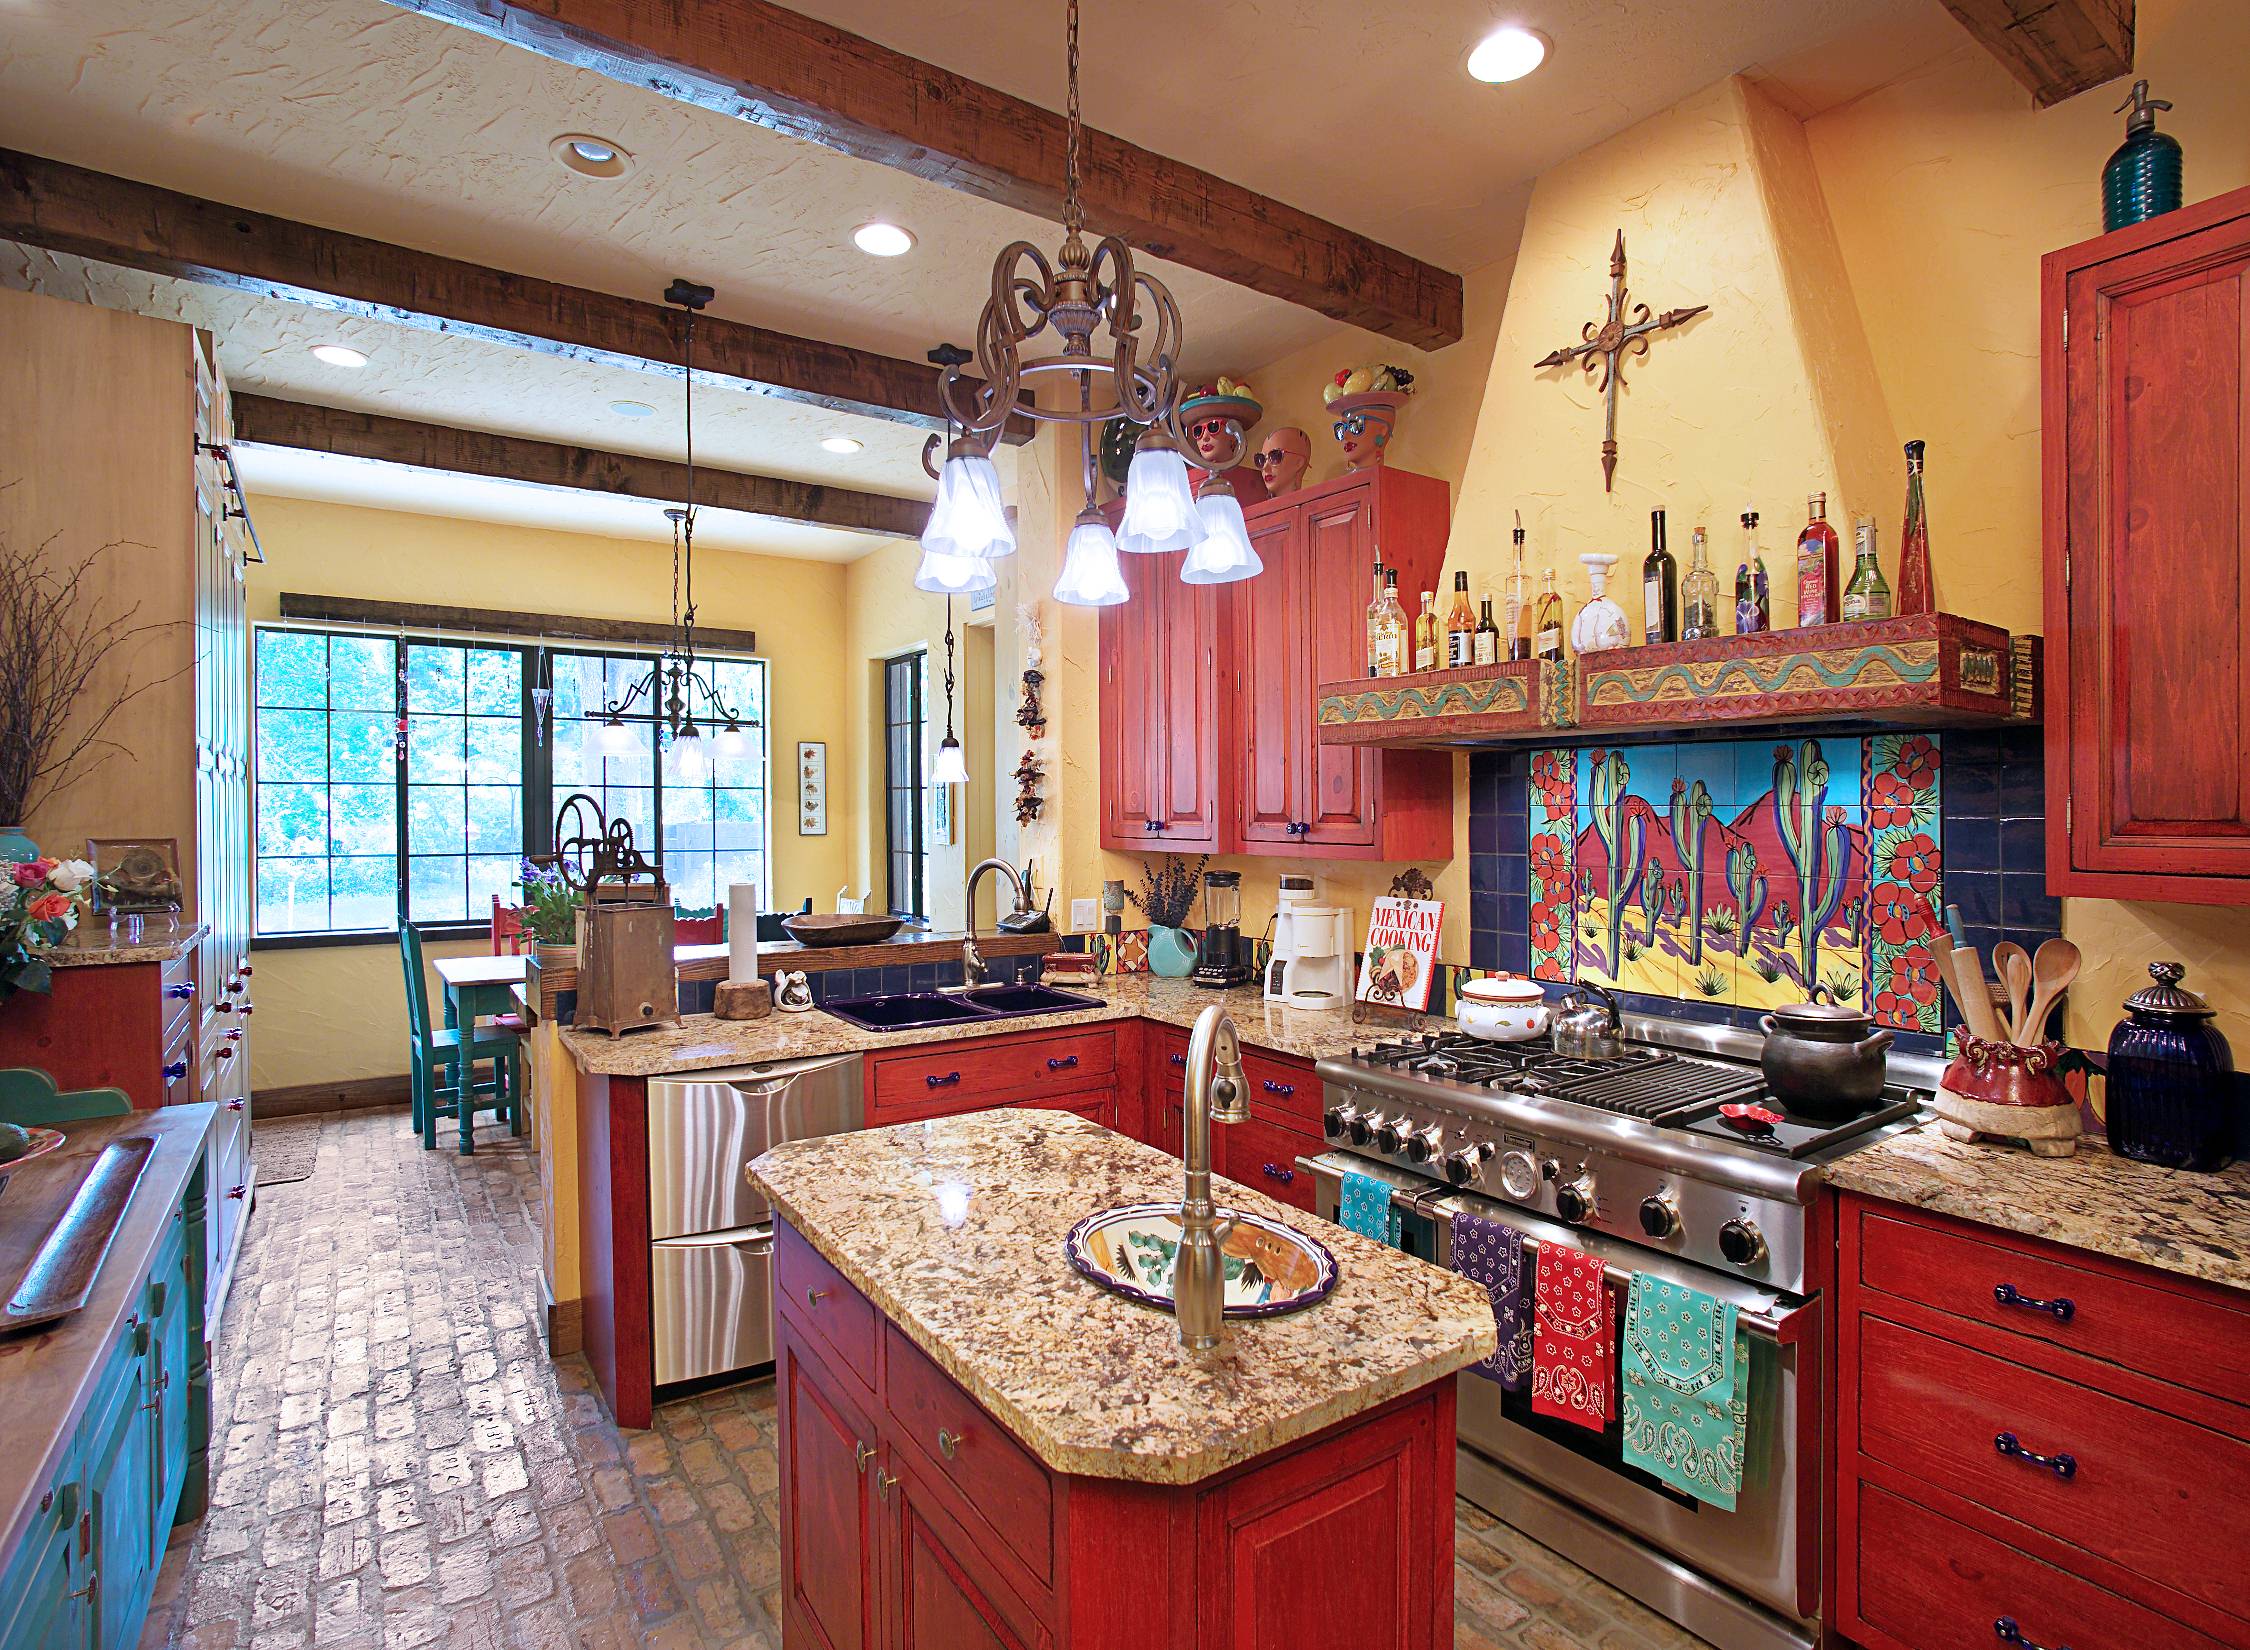 turquoise-red-gold-kitchen - Bazaar Home Decorating